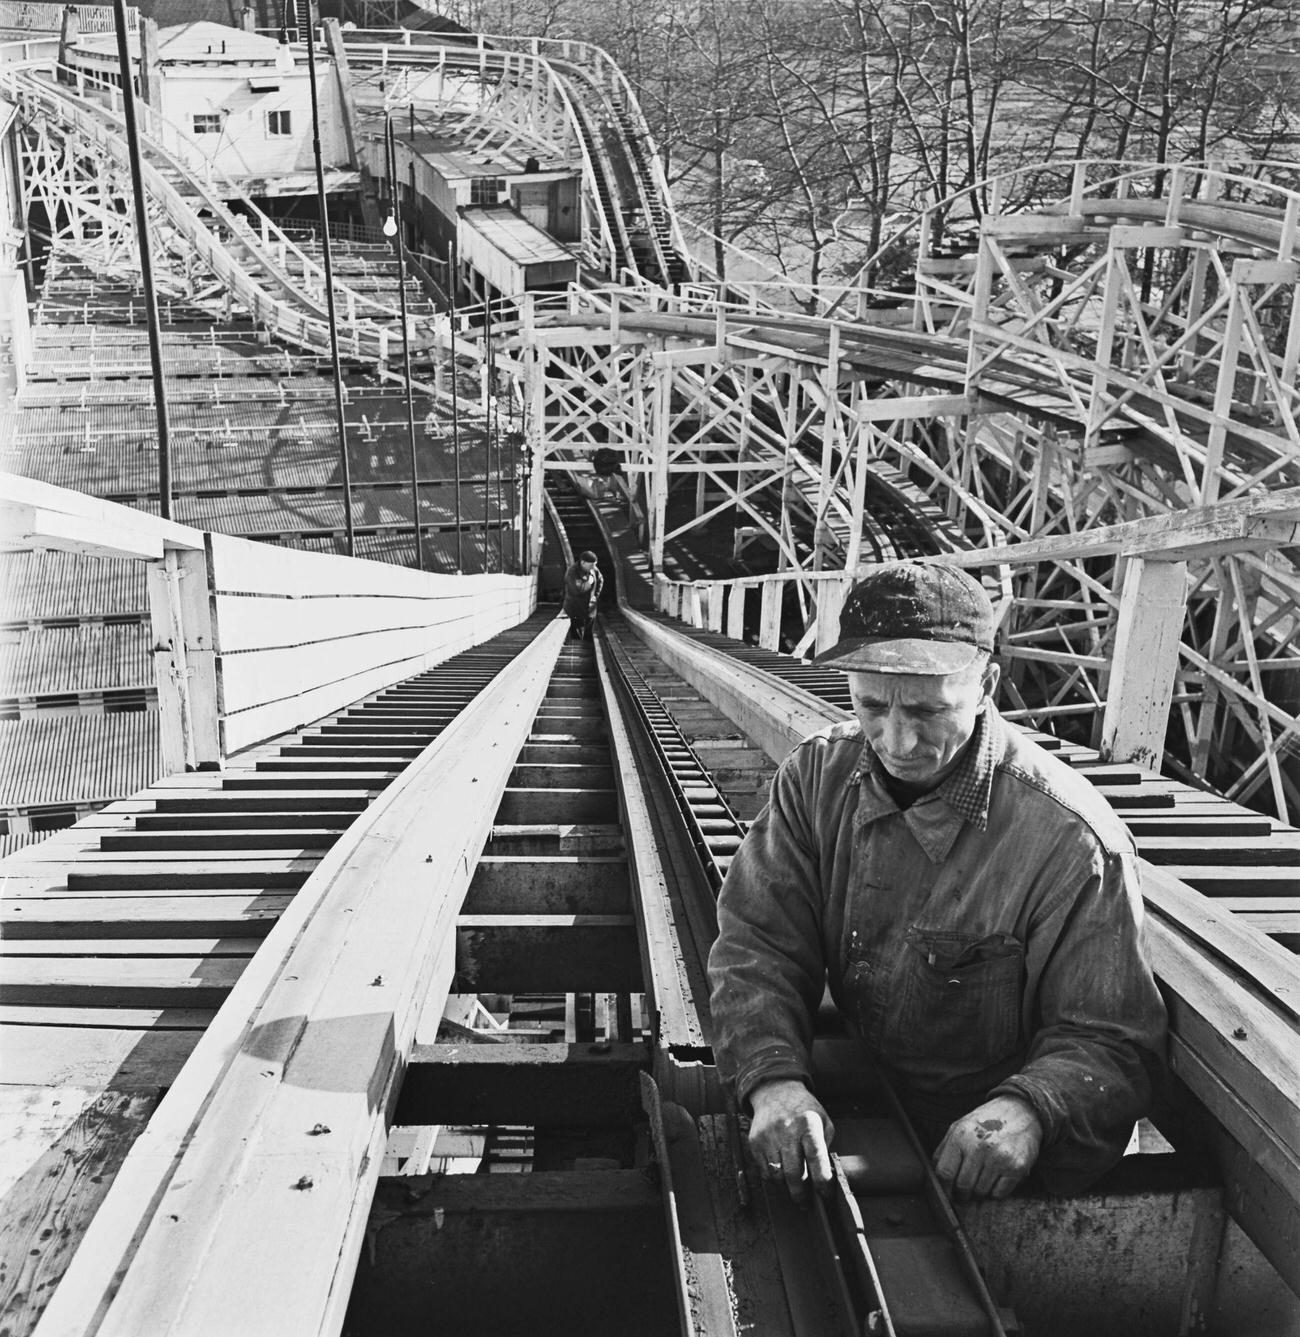 Labourer Working On Rollercoaster Chain Lift At Coney Island, Brooklyn, 1950.